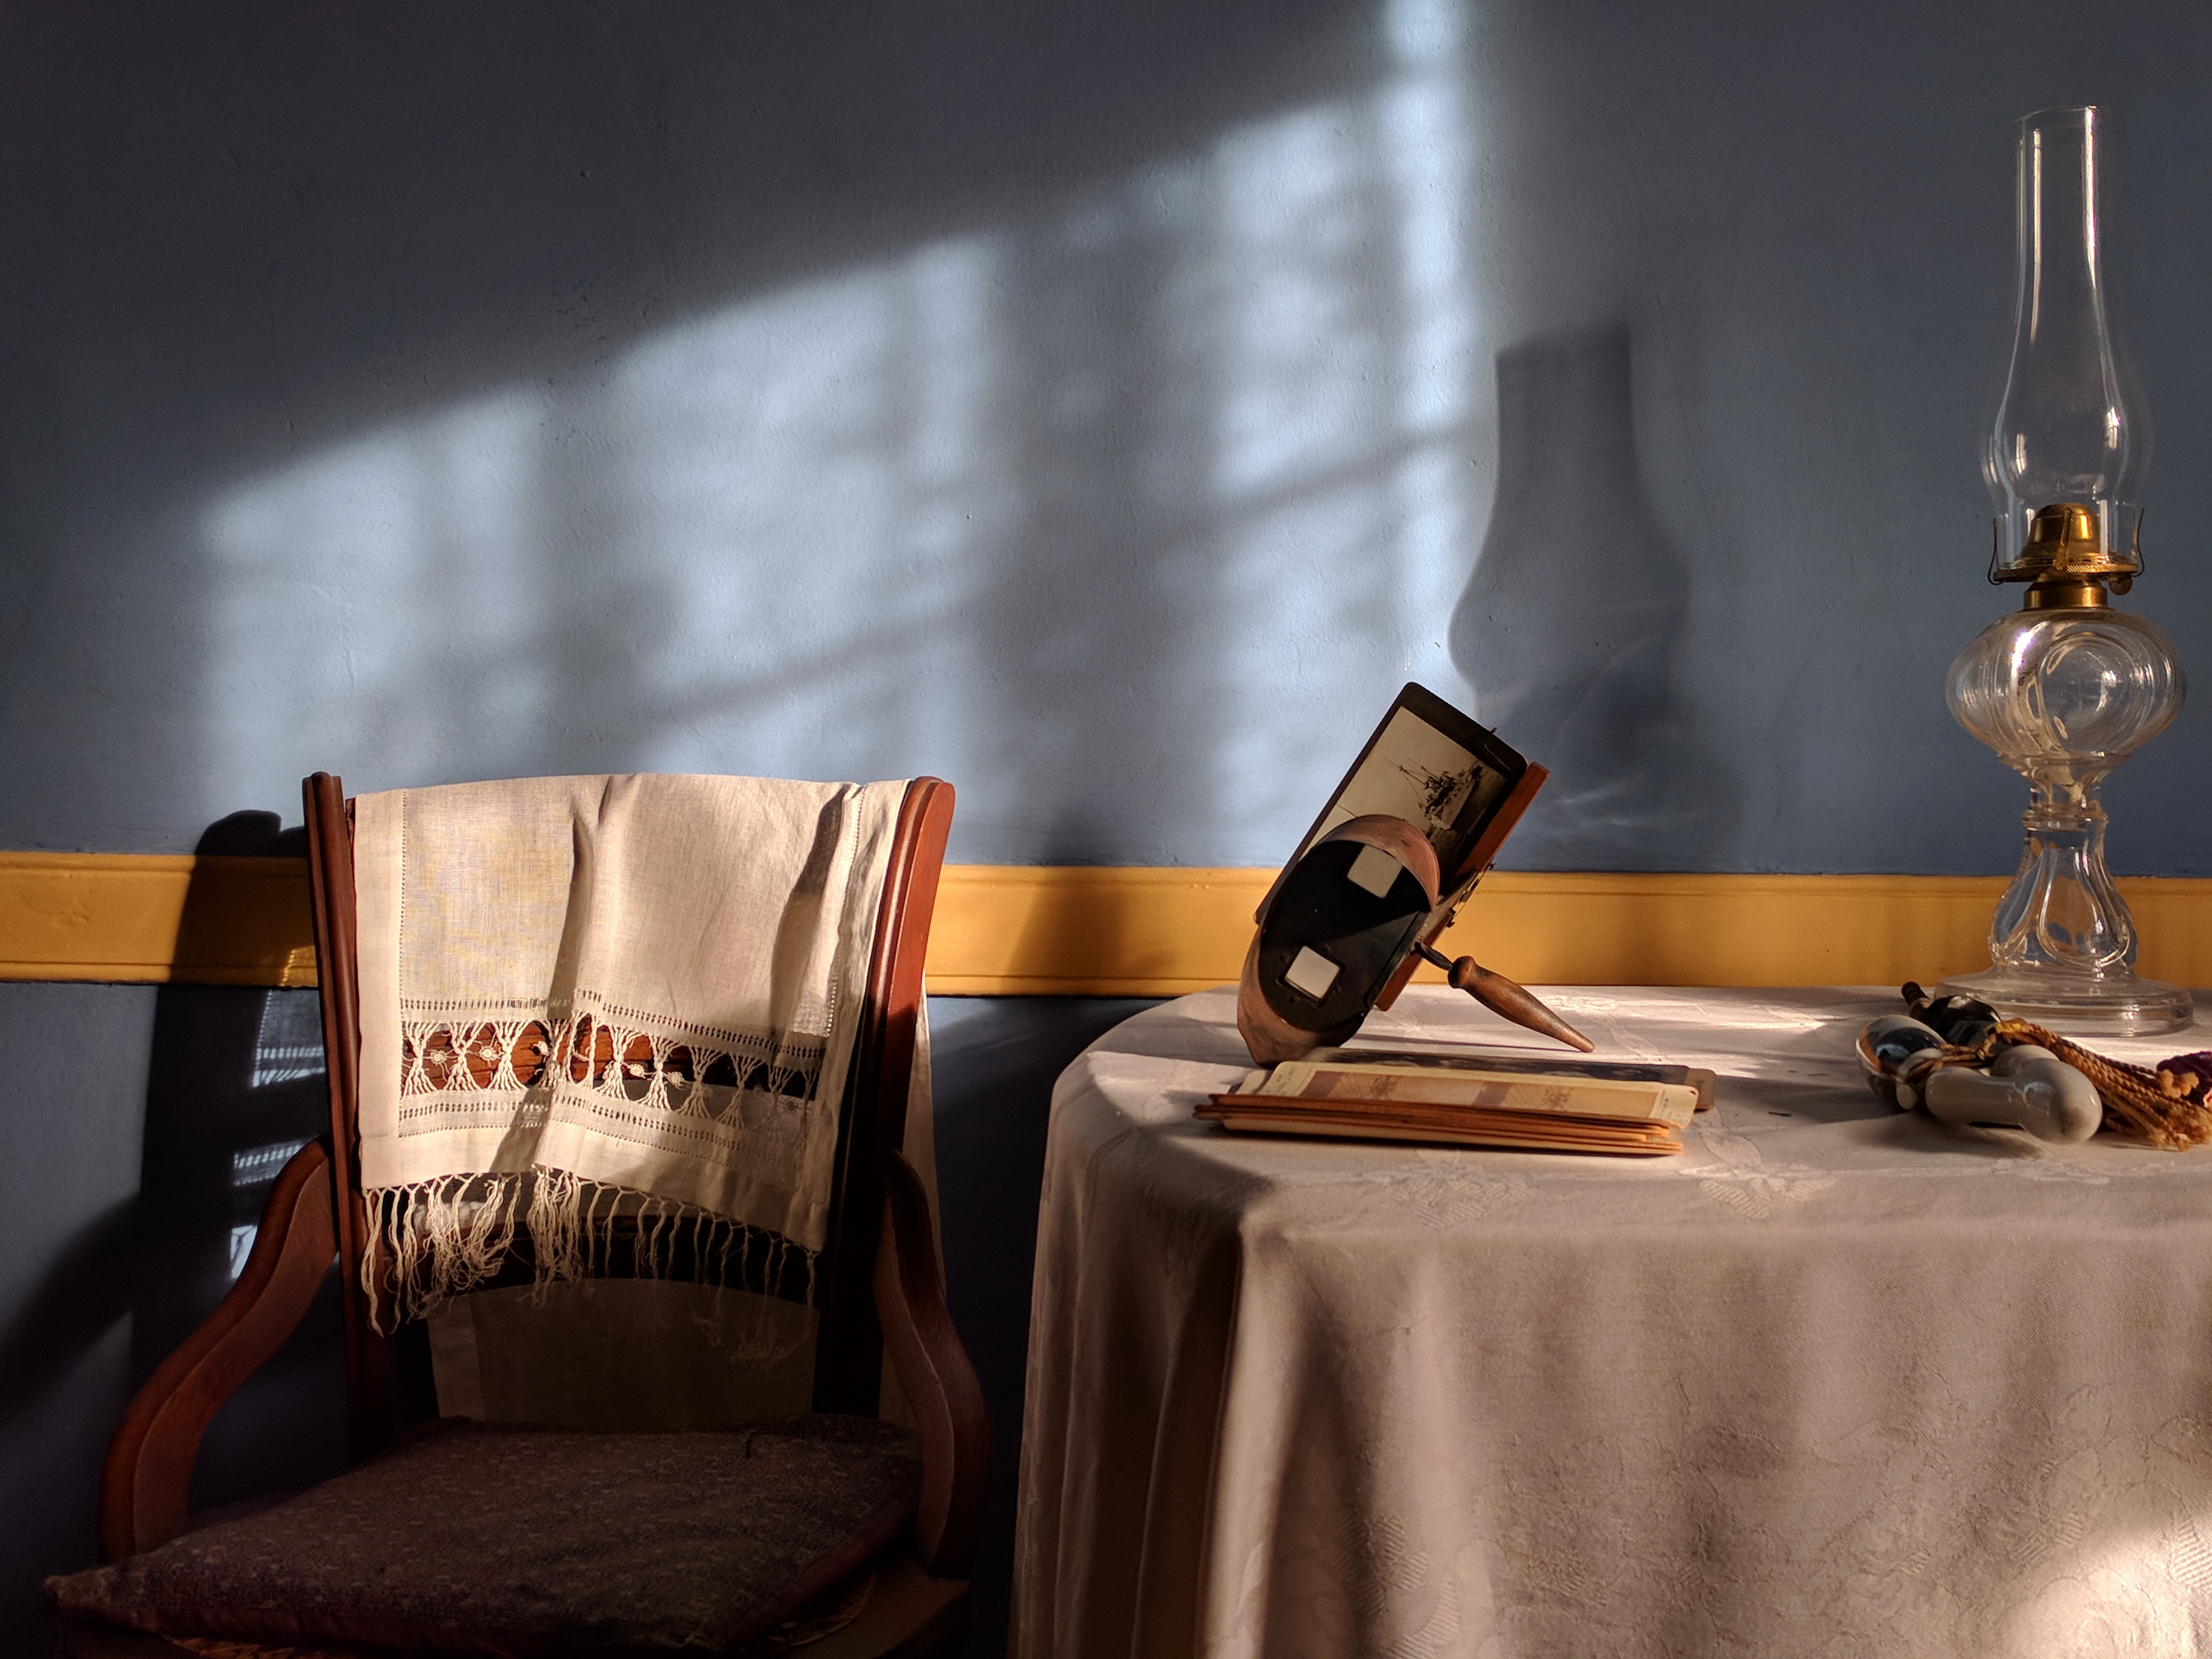 A stereoscope, pipe and oil lamp sit on a table next to a chair with a linen garment strewn over it in a sunlit room